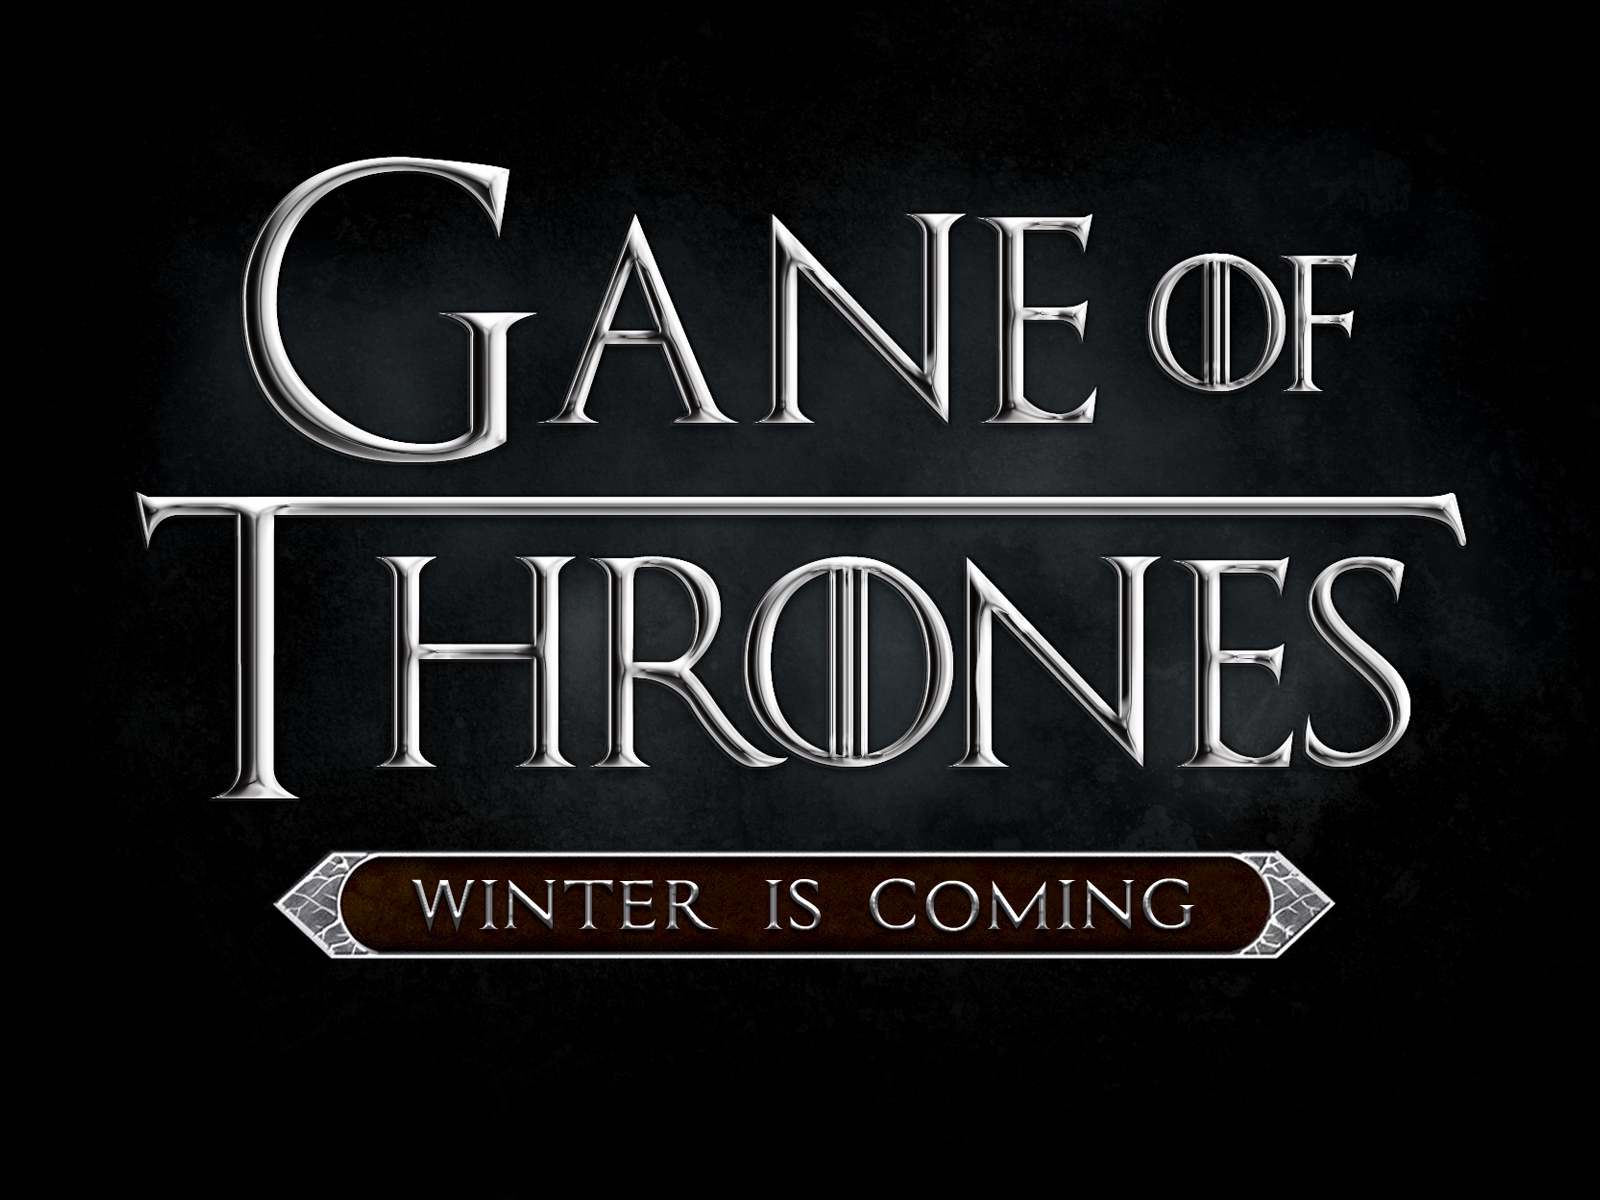 game of thrones font in word